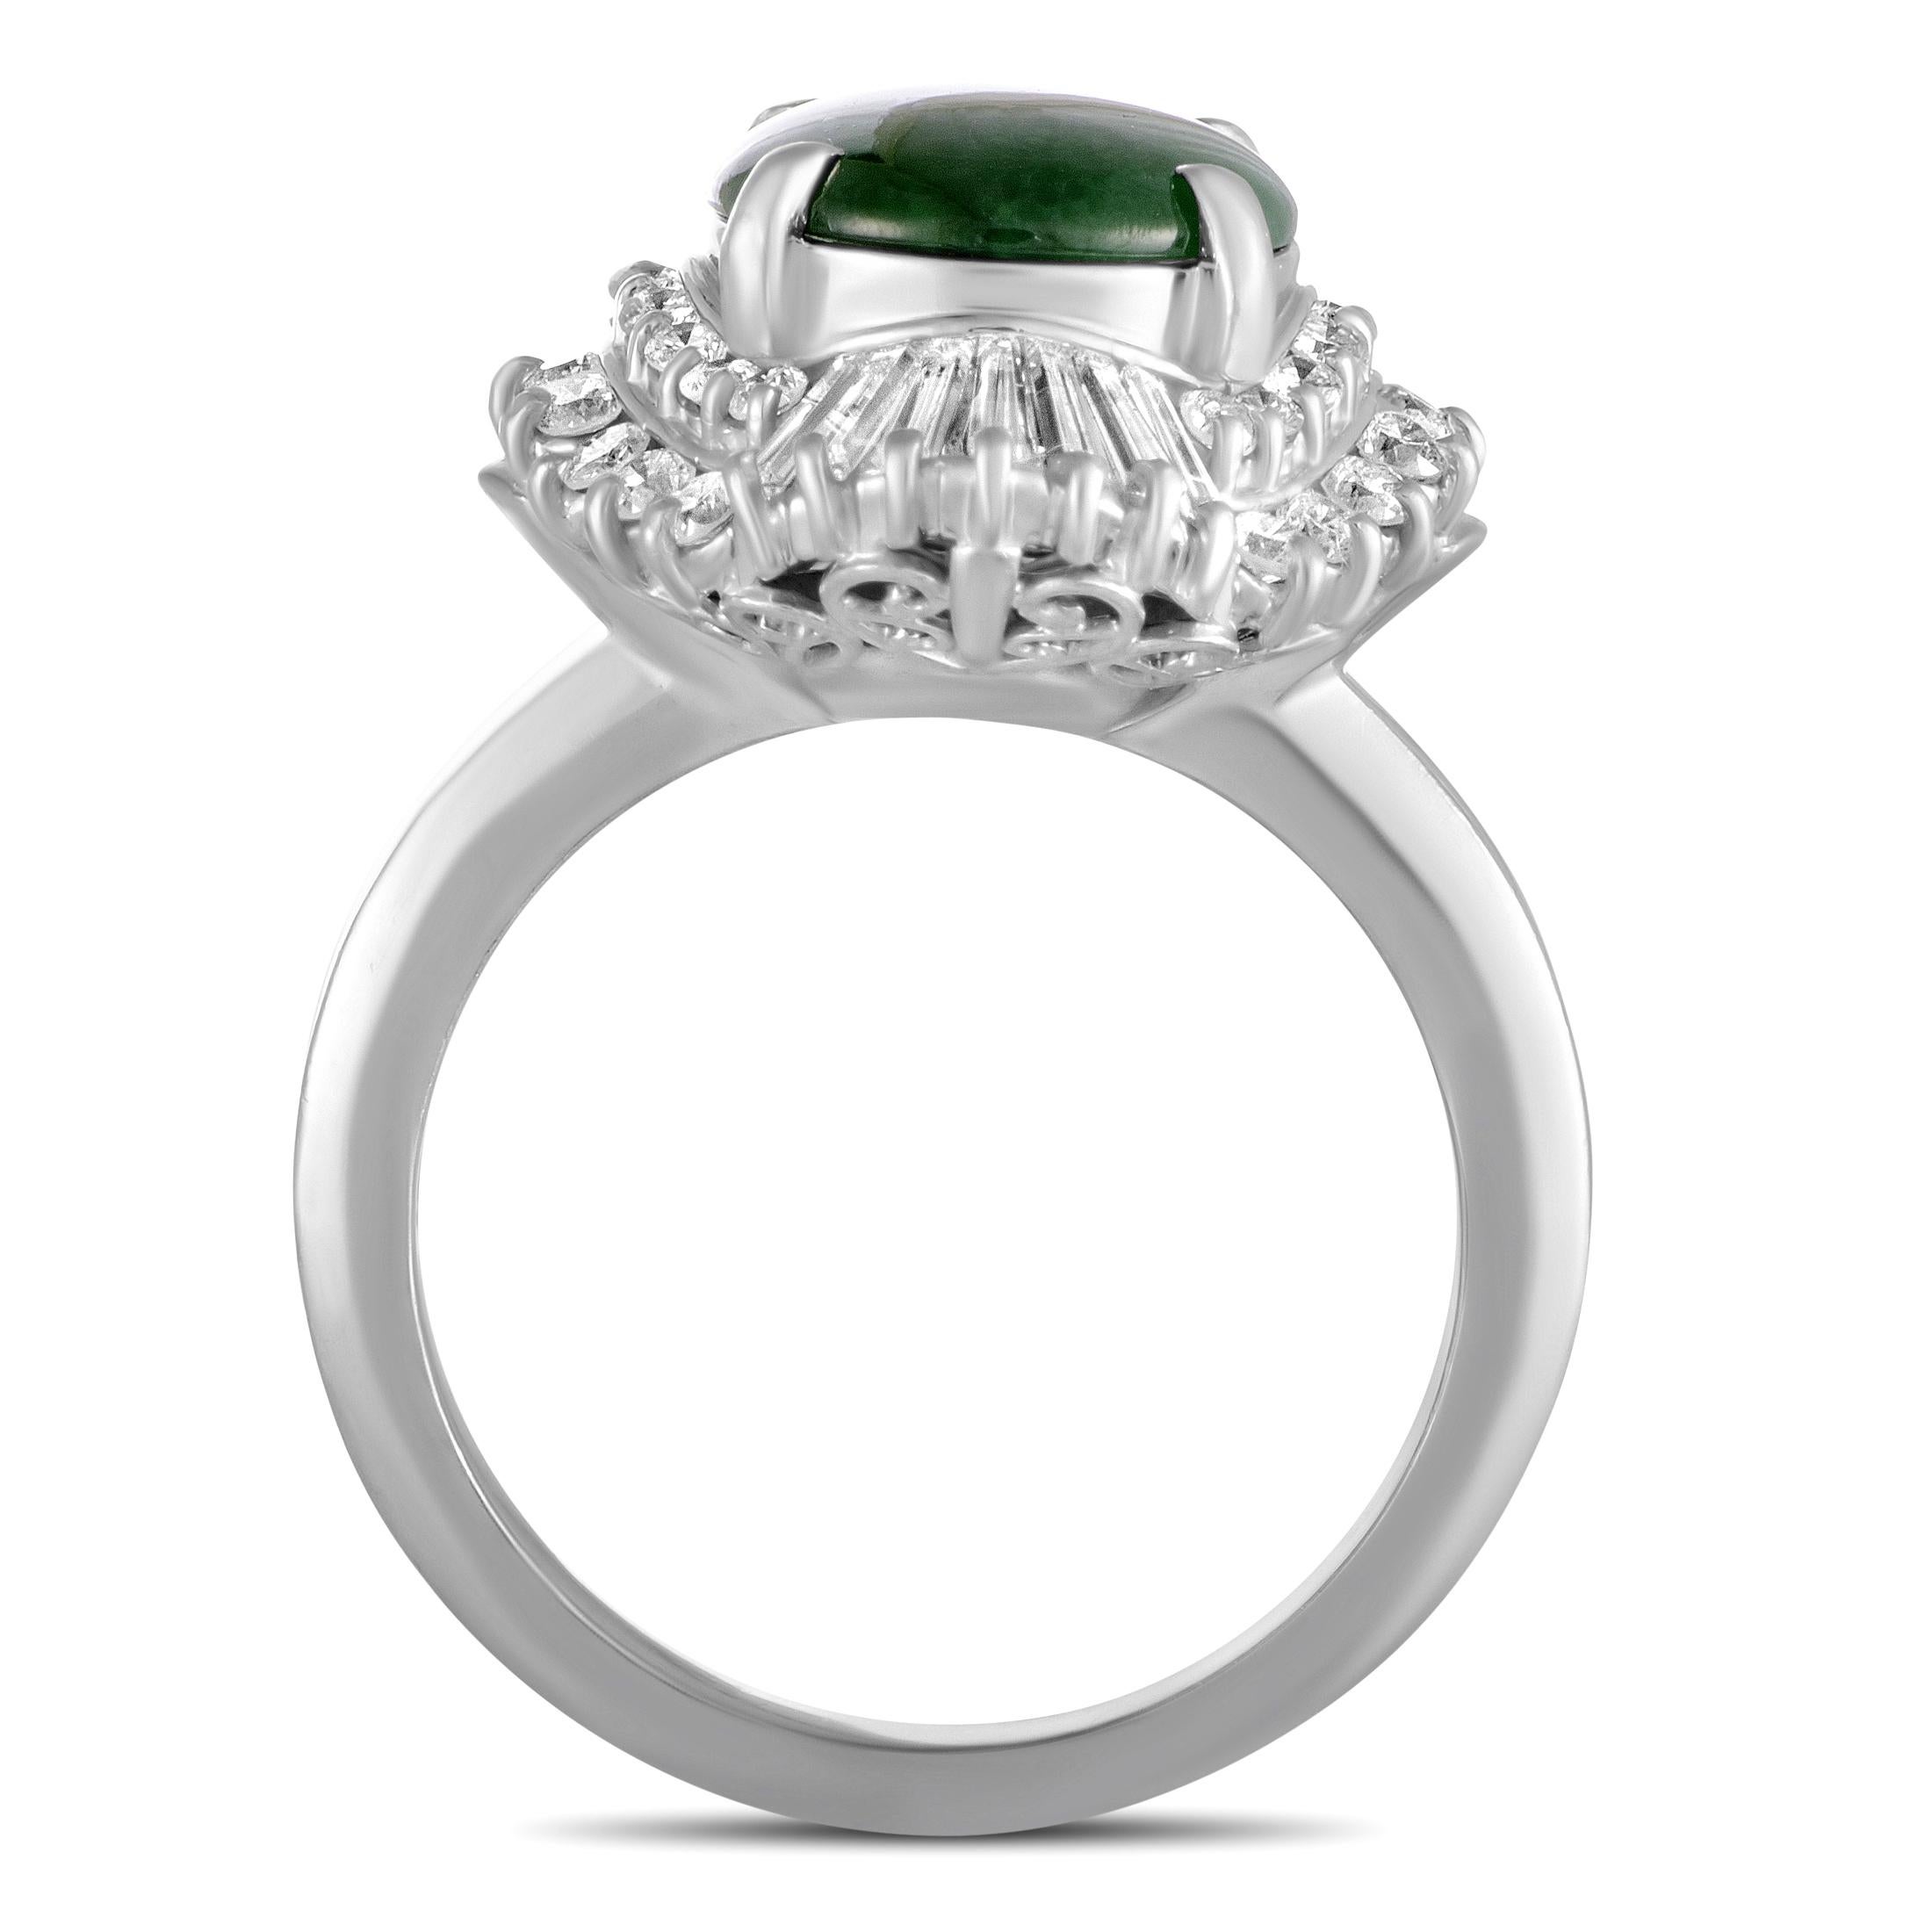 This ring is crafted from platinum and set with a jade that weighs 3.07 carats and with round and tapered baguette diamonds that amount to 1.07 carats. The ring weighs 15 grams, boasting band thickness of 3 mm and top height of 9 mm, while top